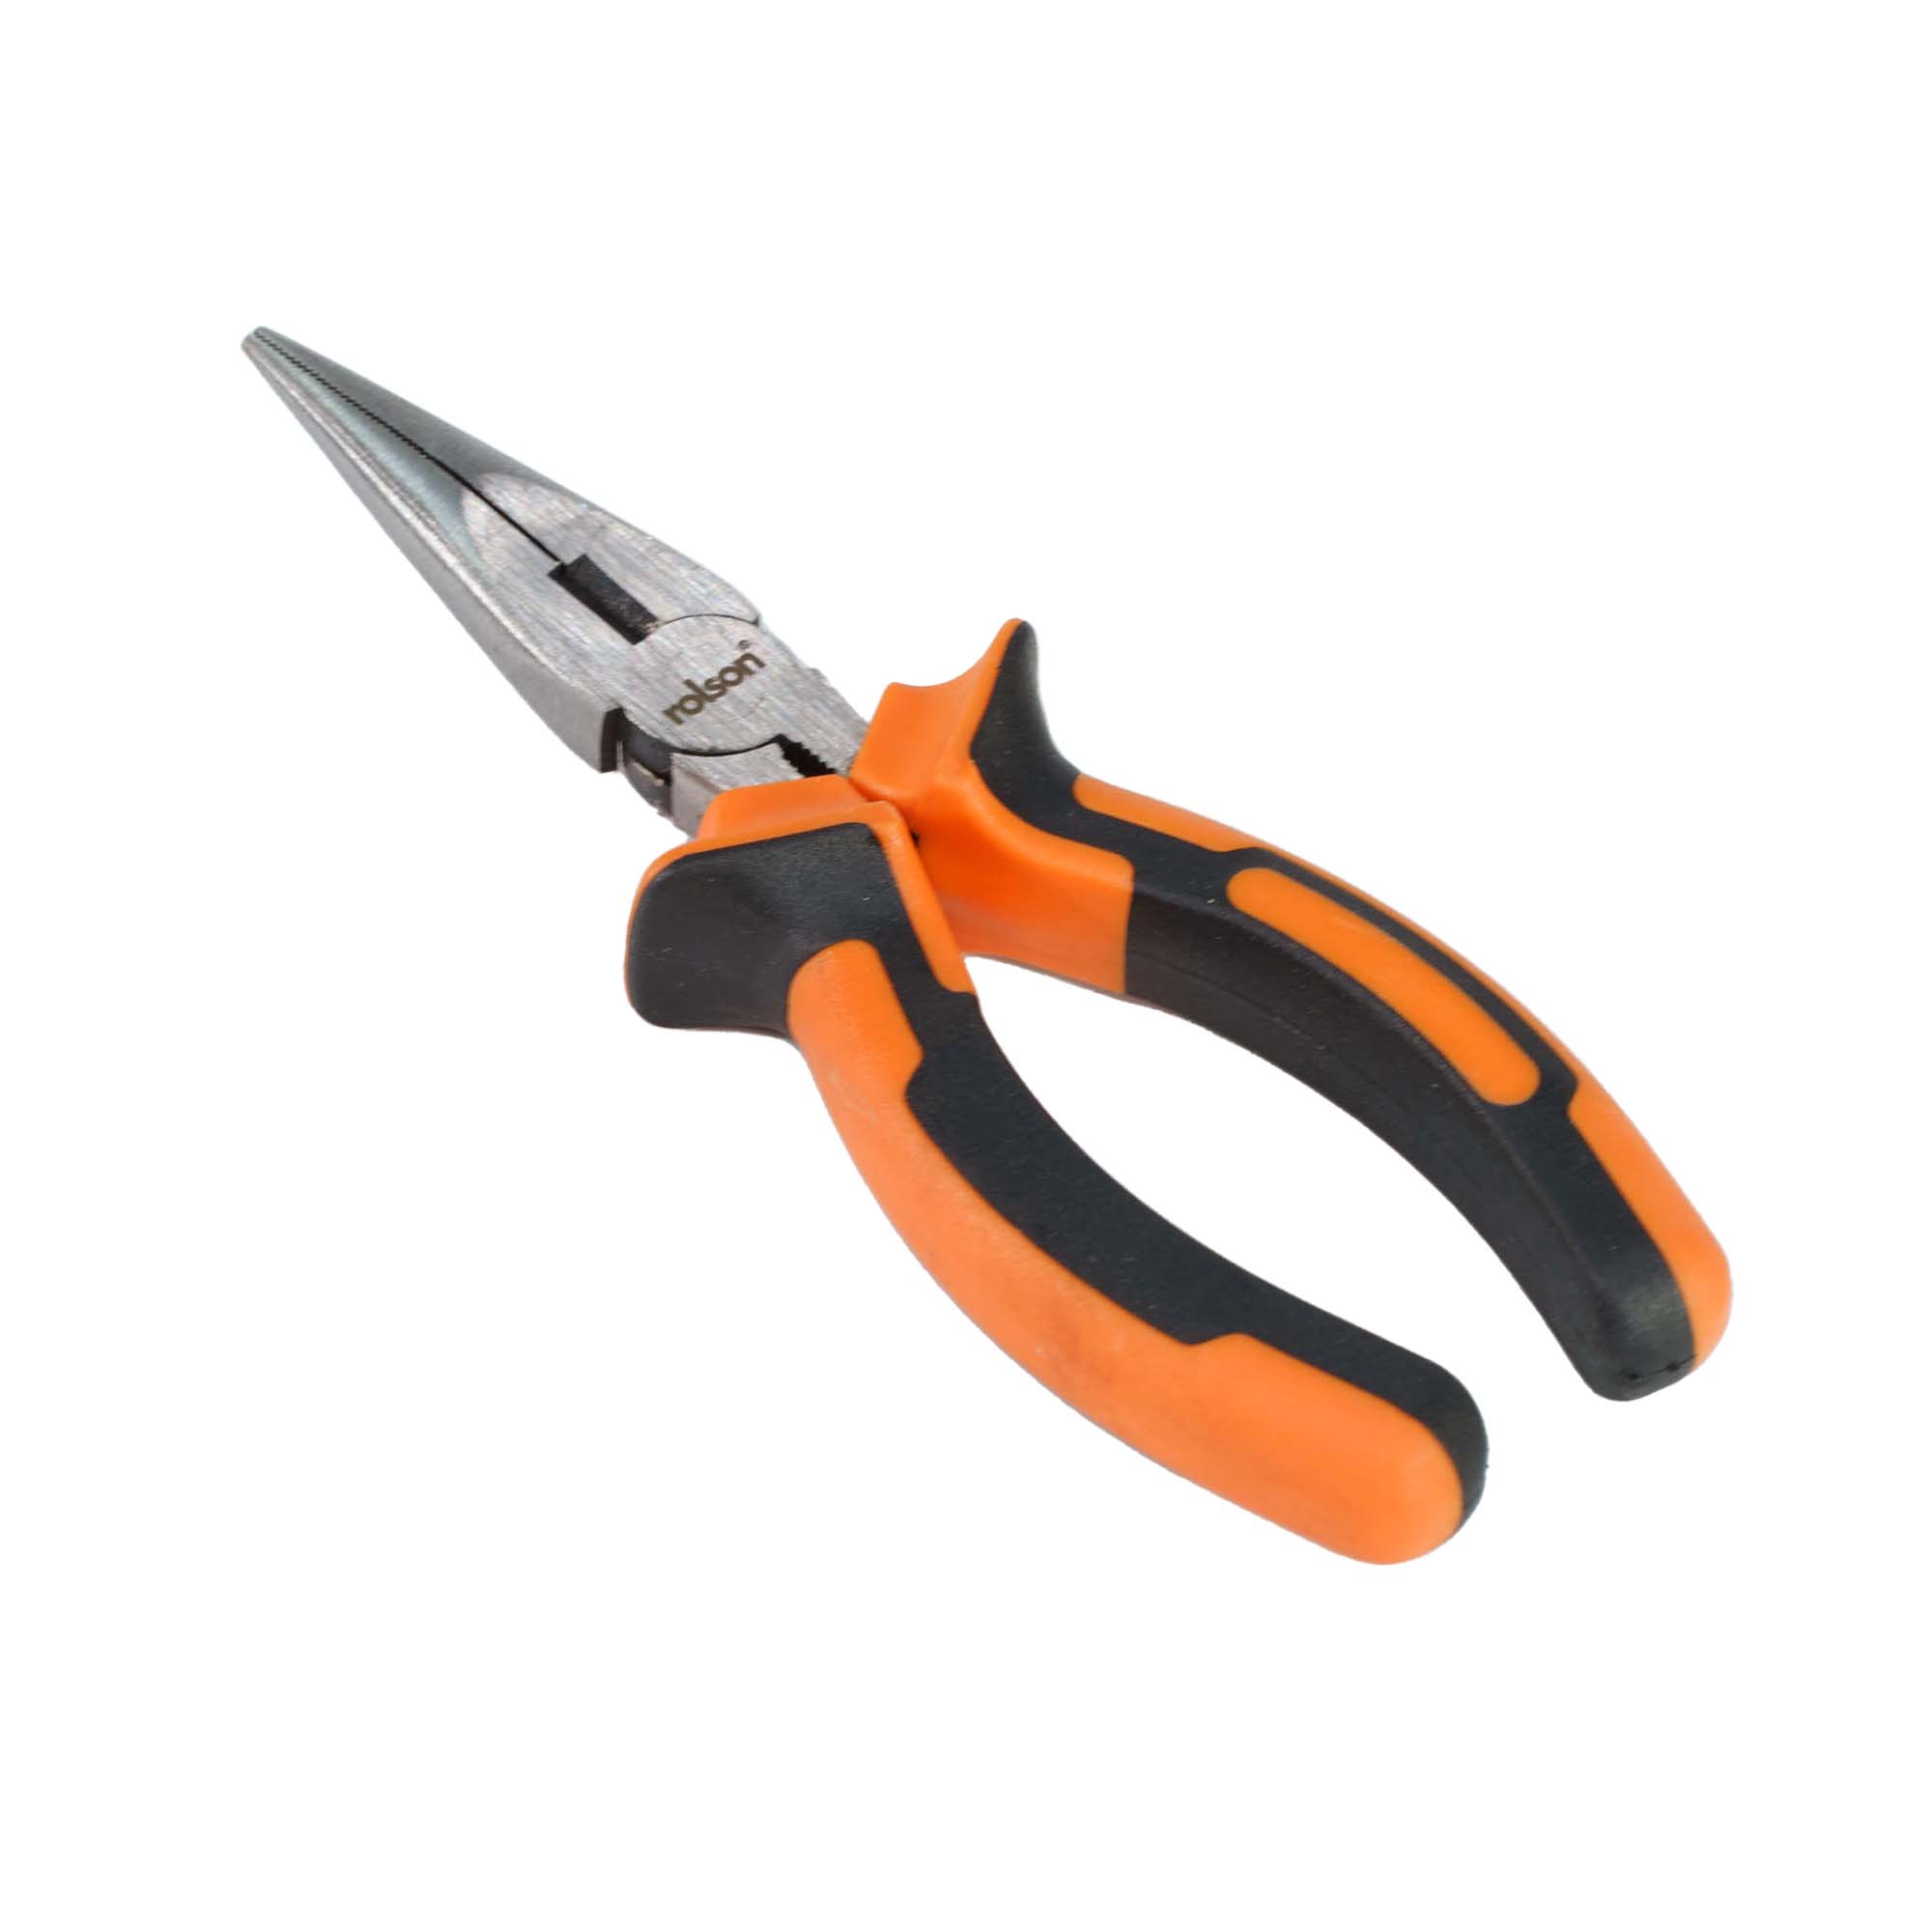 Xuron 475 Short Nose Precision Plier with Heat Treated Alloy Steel Jaws &  Soft Rubber Hand Grips